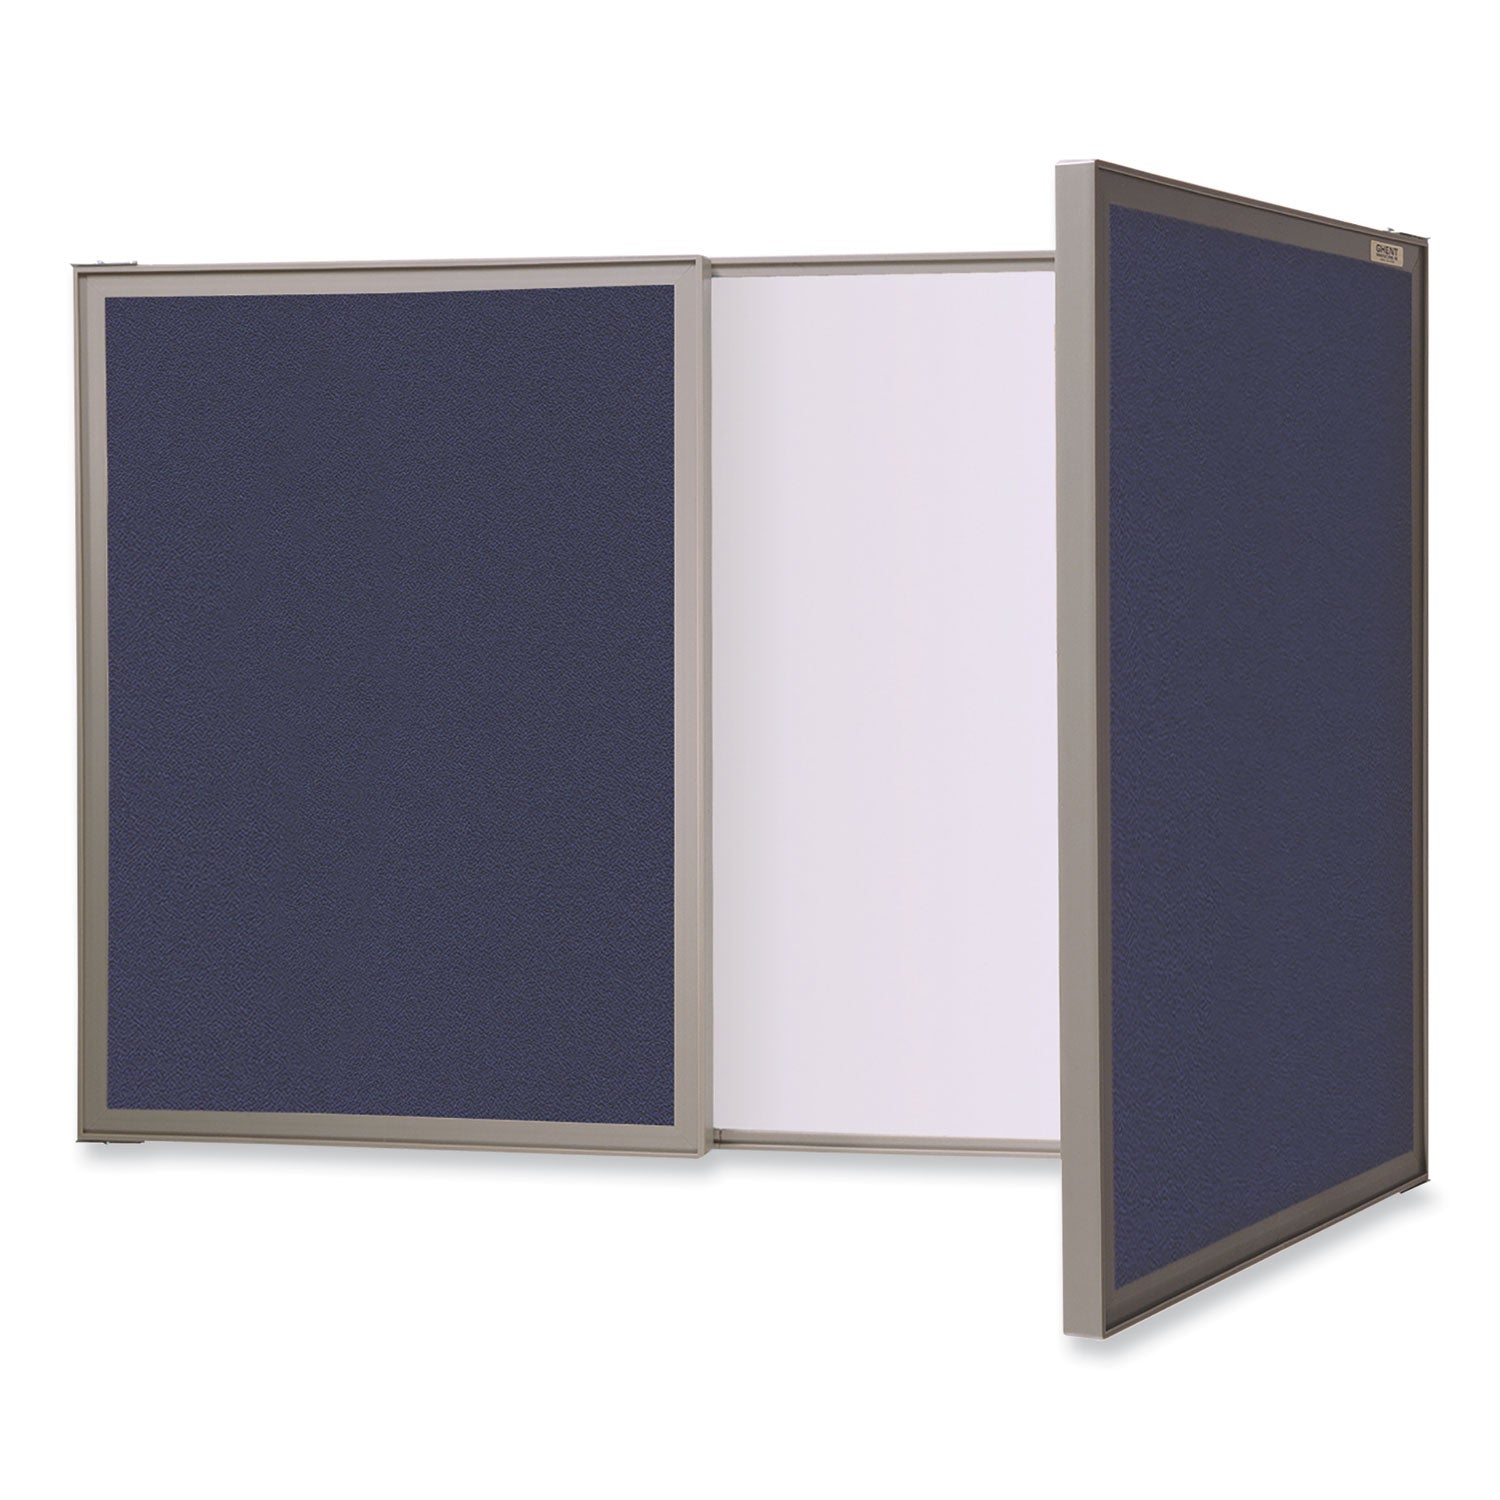 visuall-pc-whiteboard-cabinet-blue-fabric-bulletin-board-exterior-doors-36x24-aluminum-frame-ships-in-7-10-business-days_ghe41301 - 1